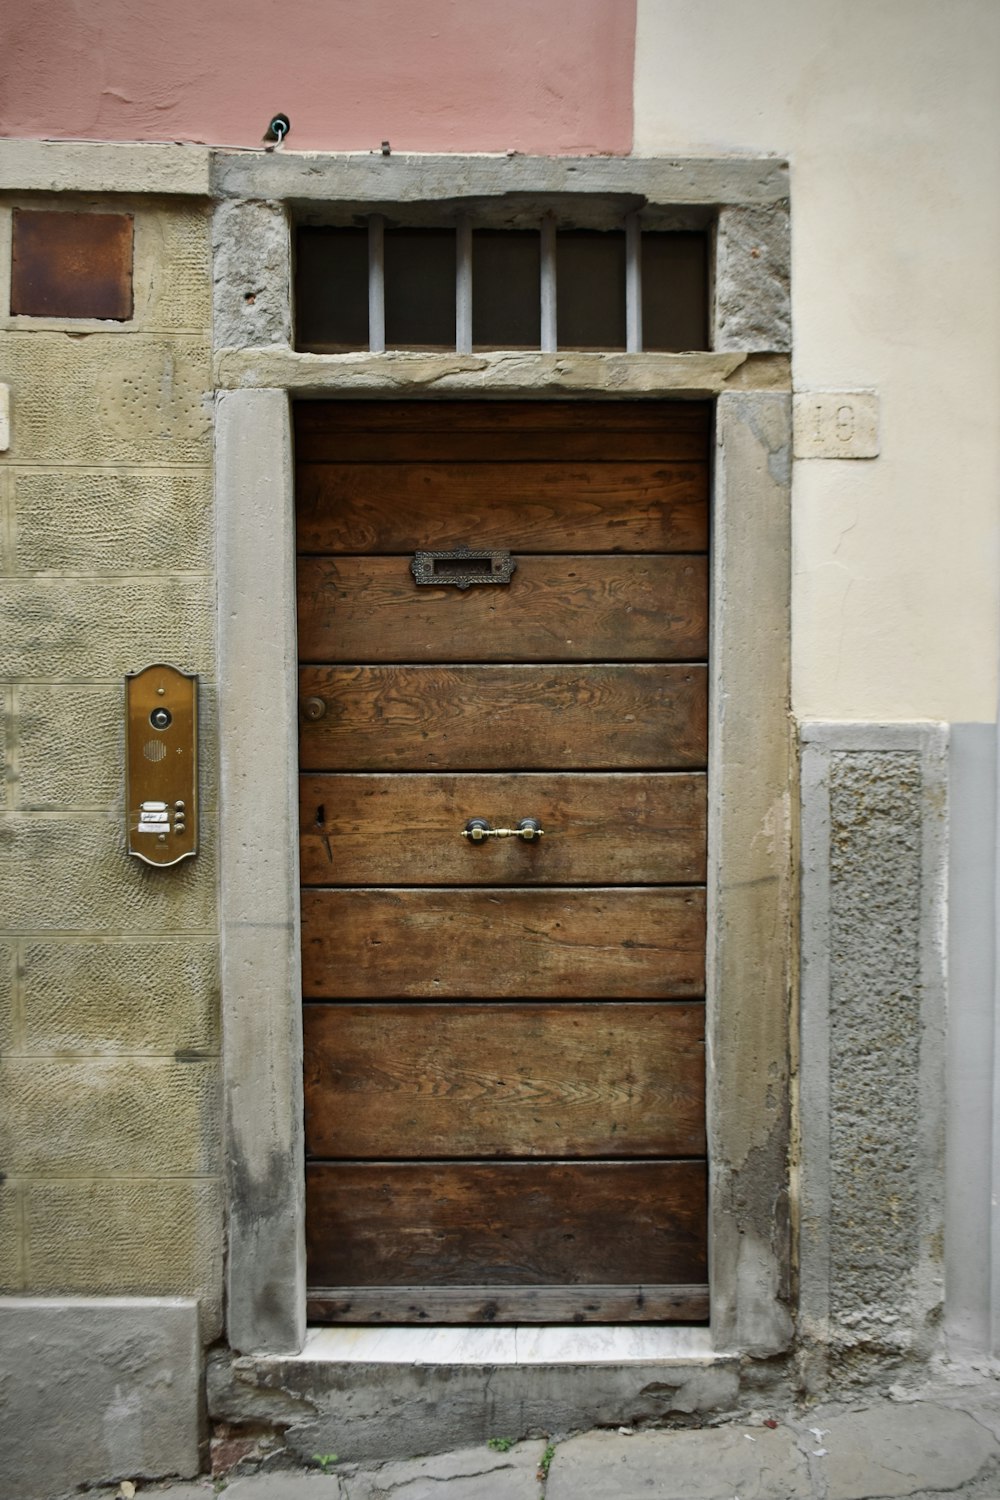 a large wooden door with a window above it